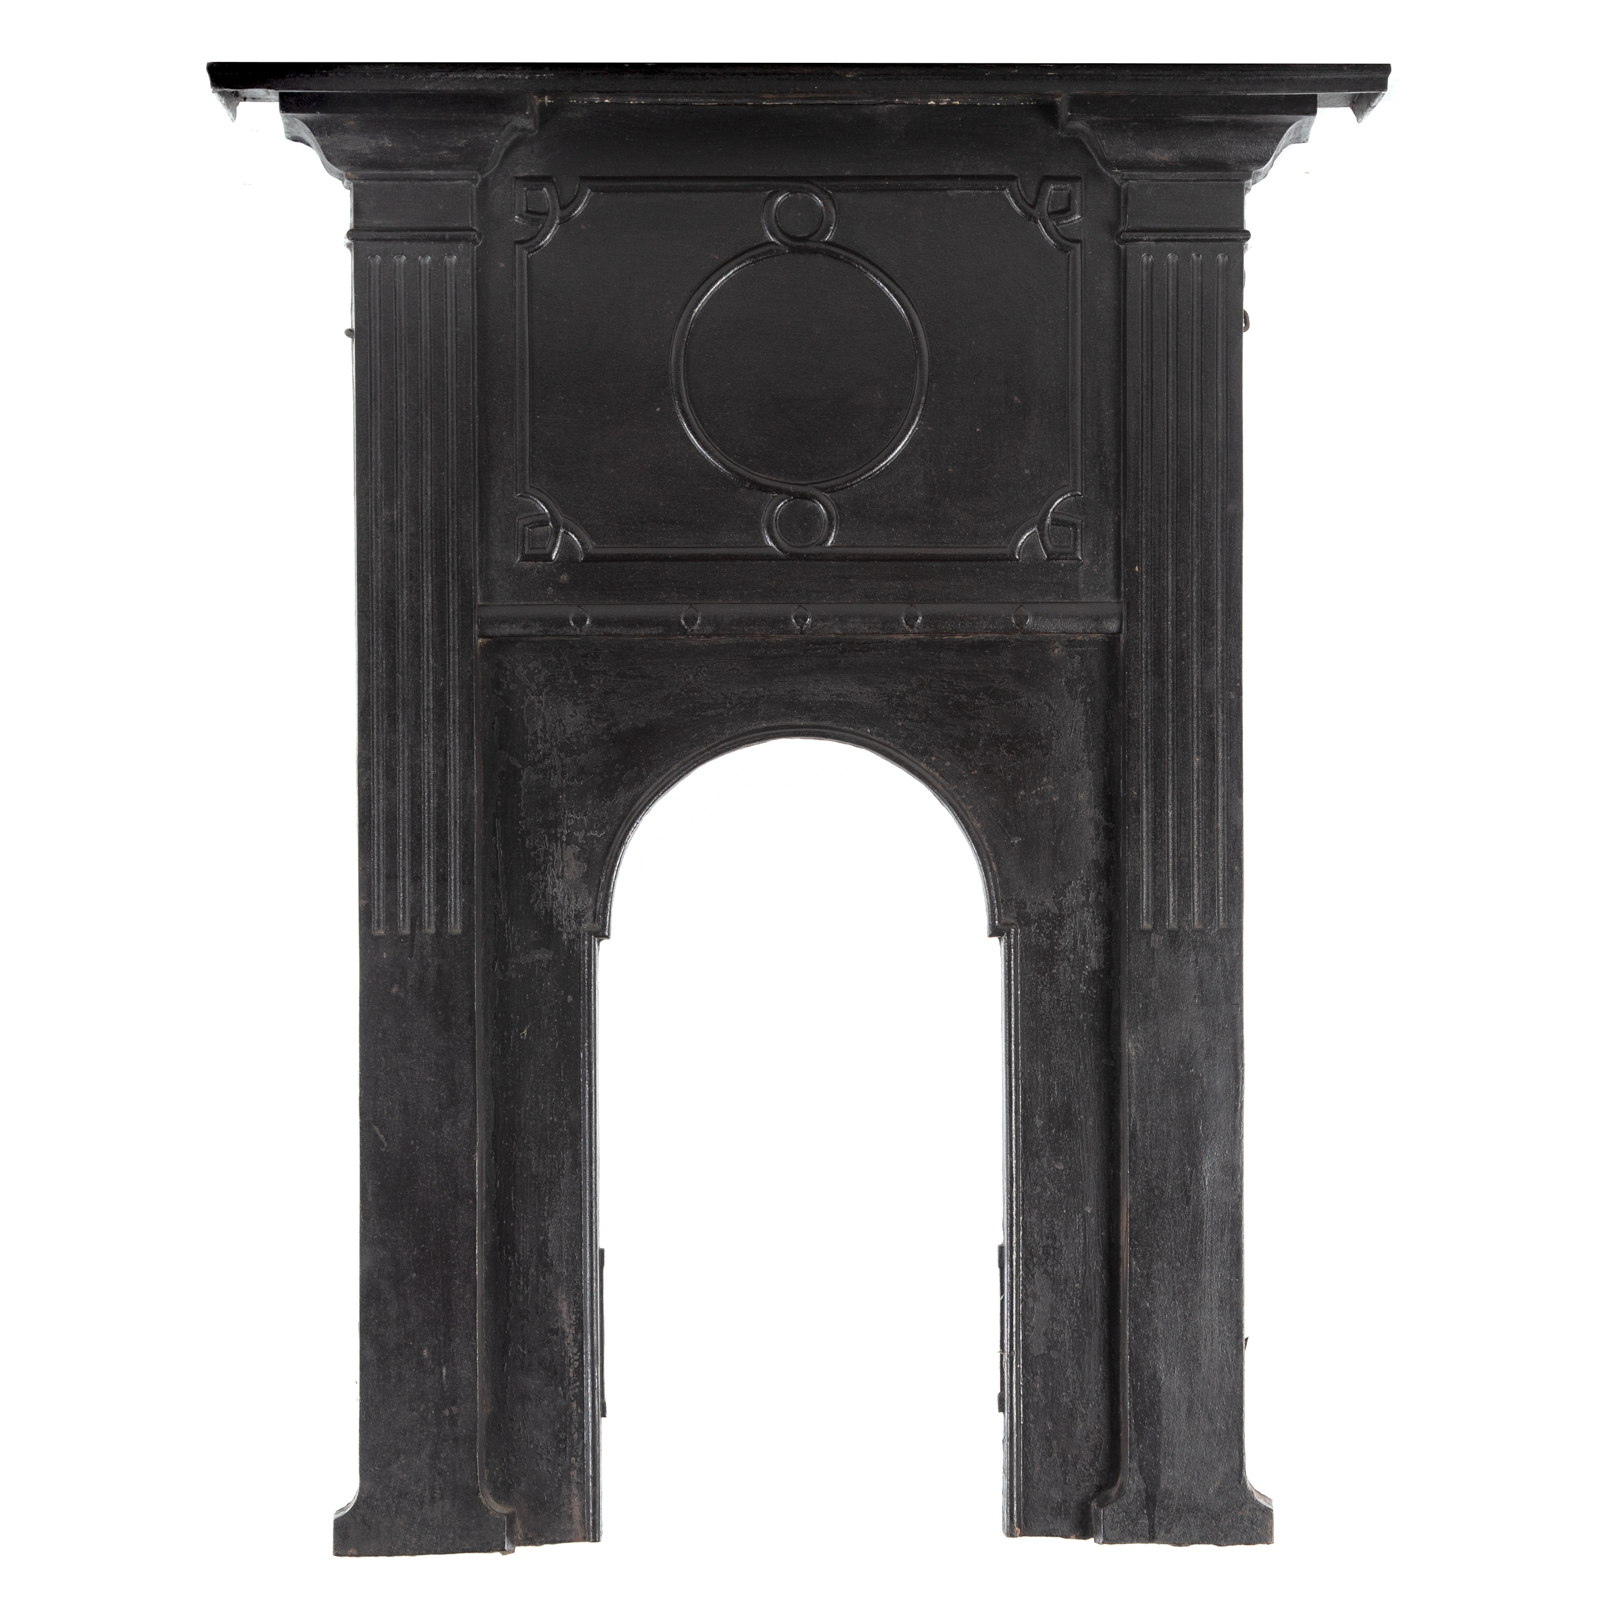 VICTORIAN WROUGHT IRON FIREPLACE 36957f